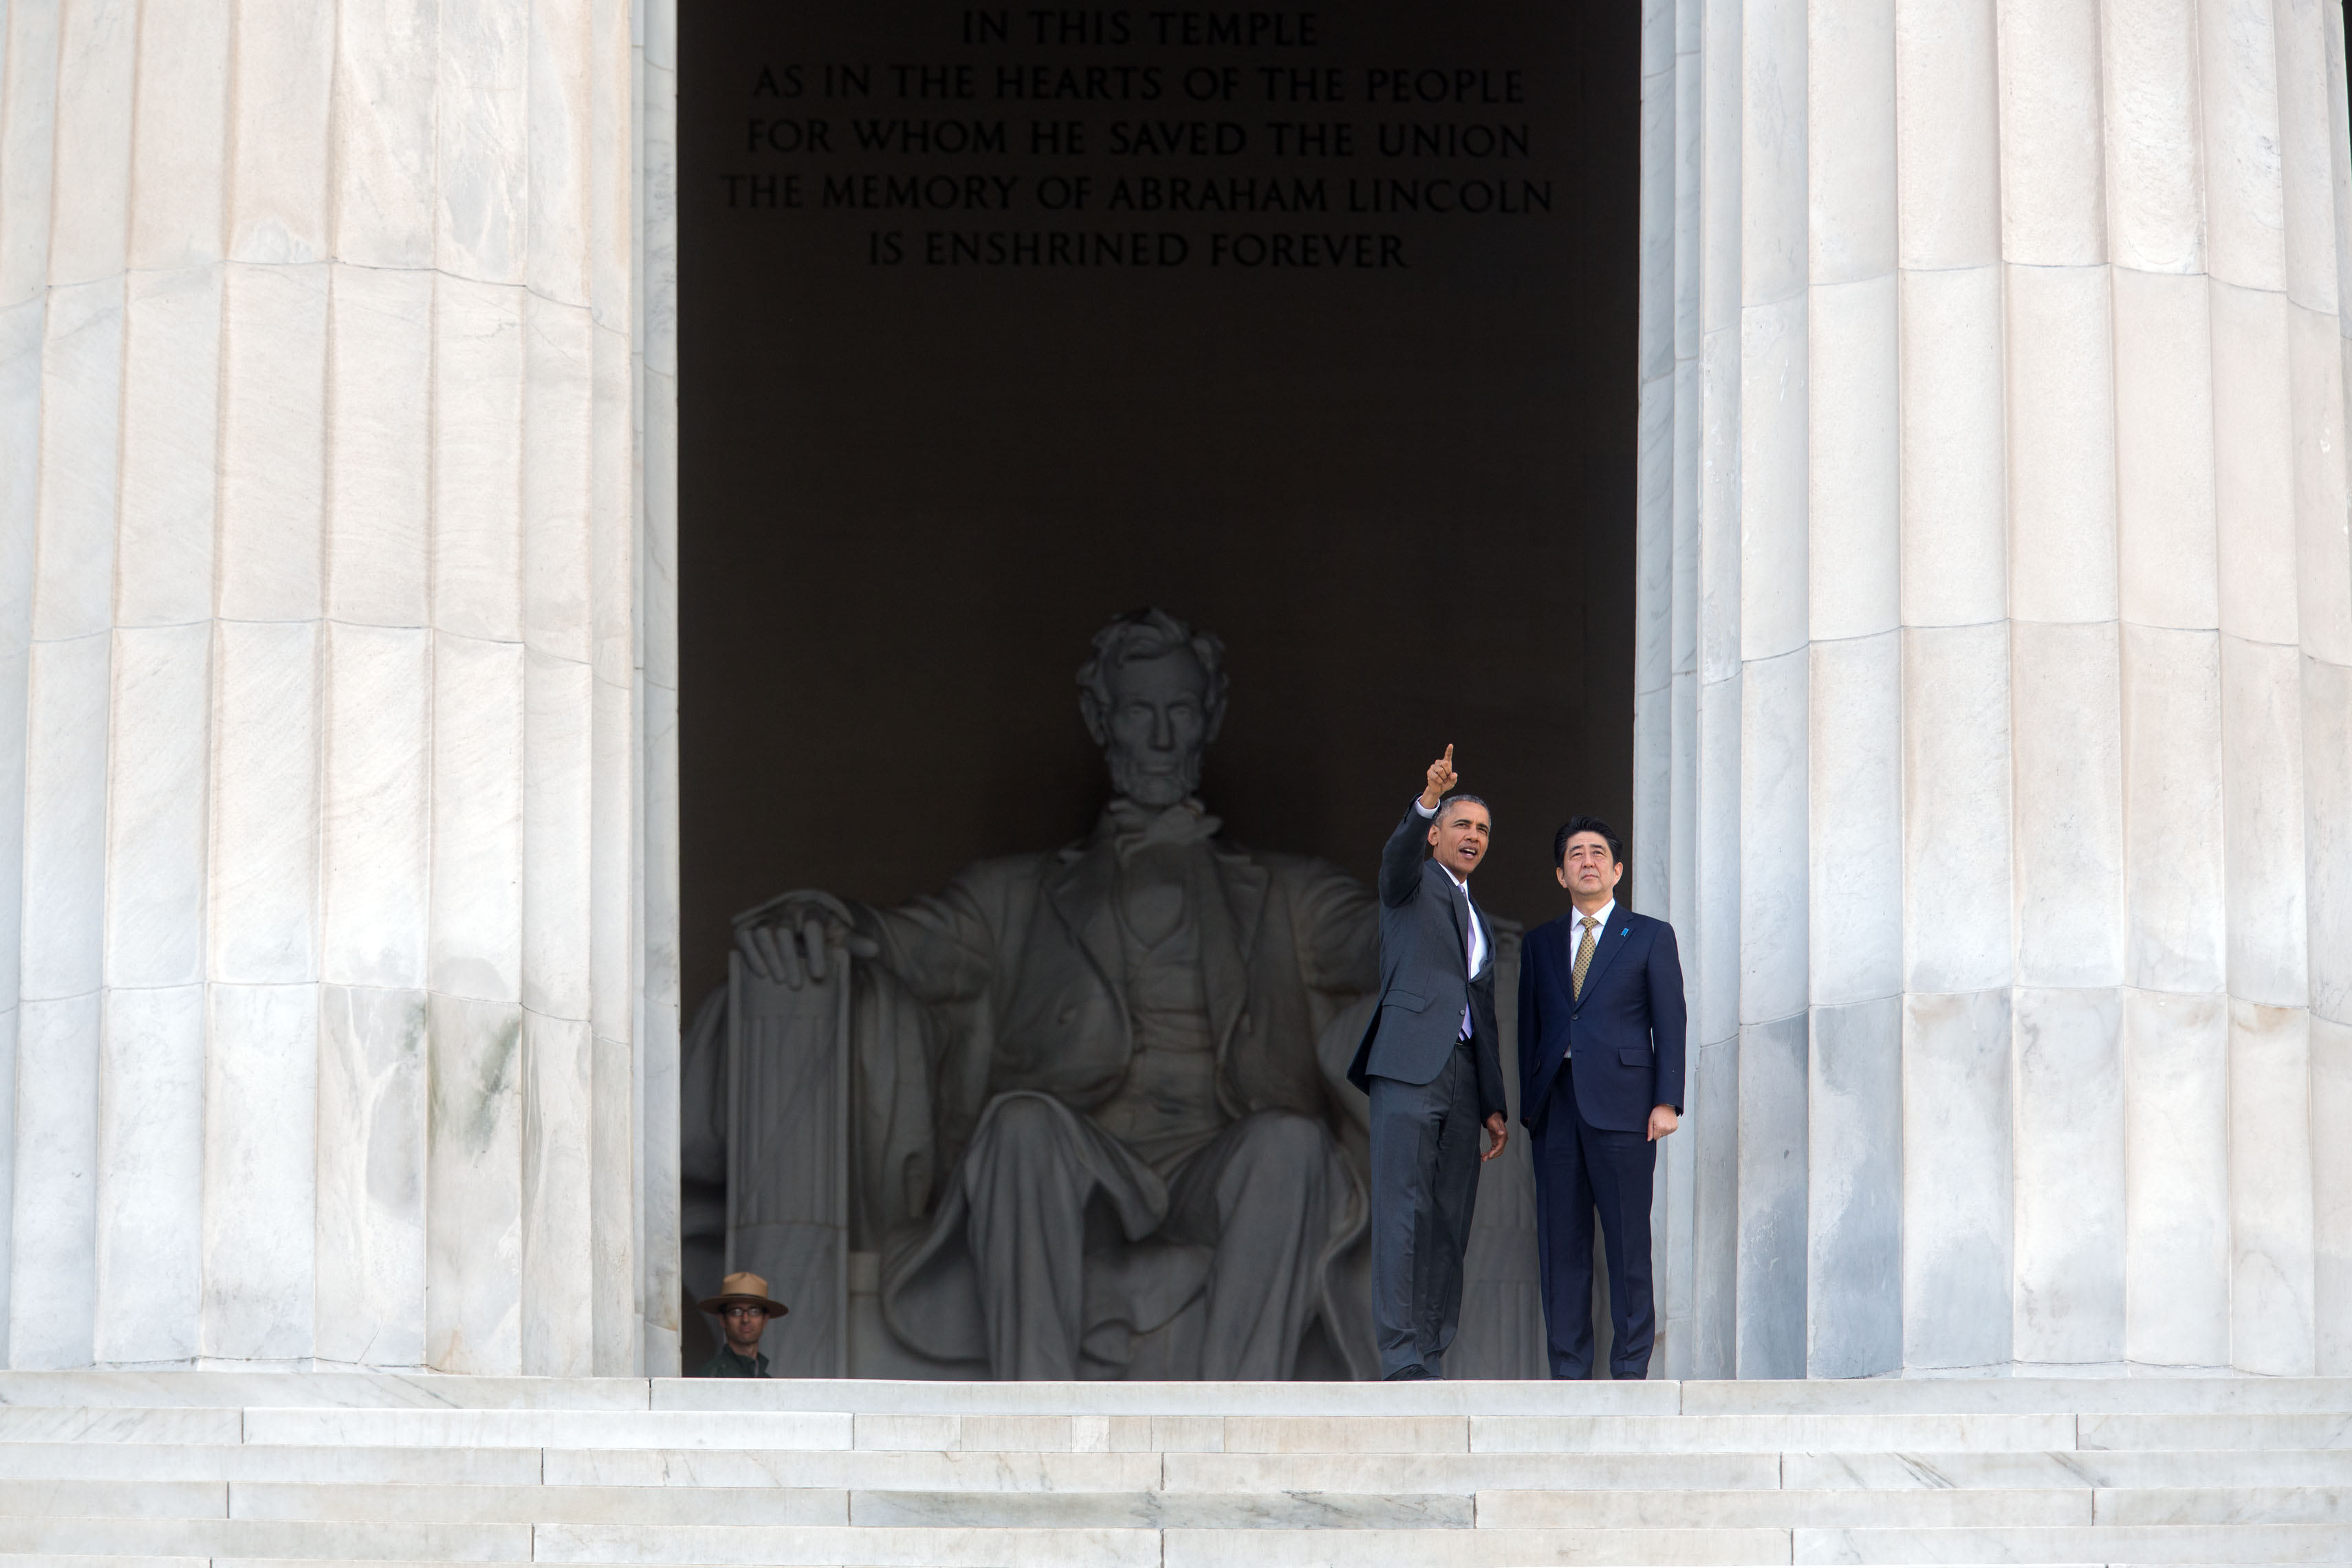 President Obama and Prime Minister Abe of Japan visit the Lincoln Memorial